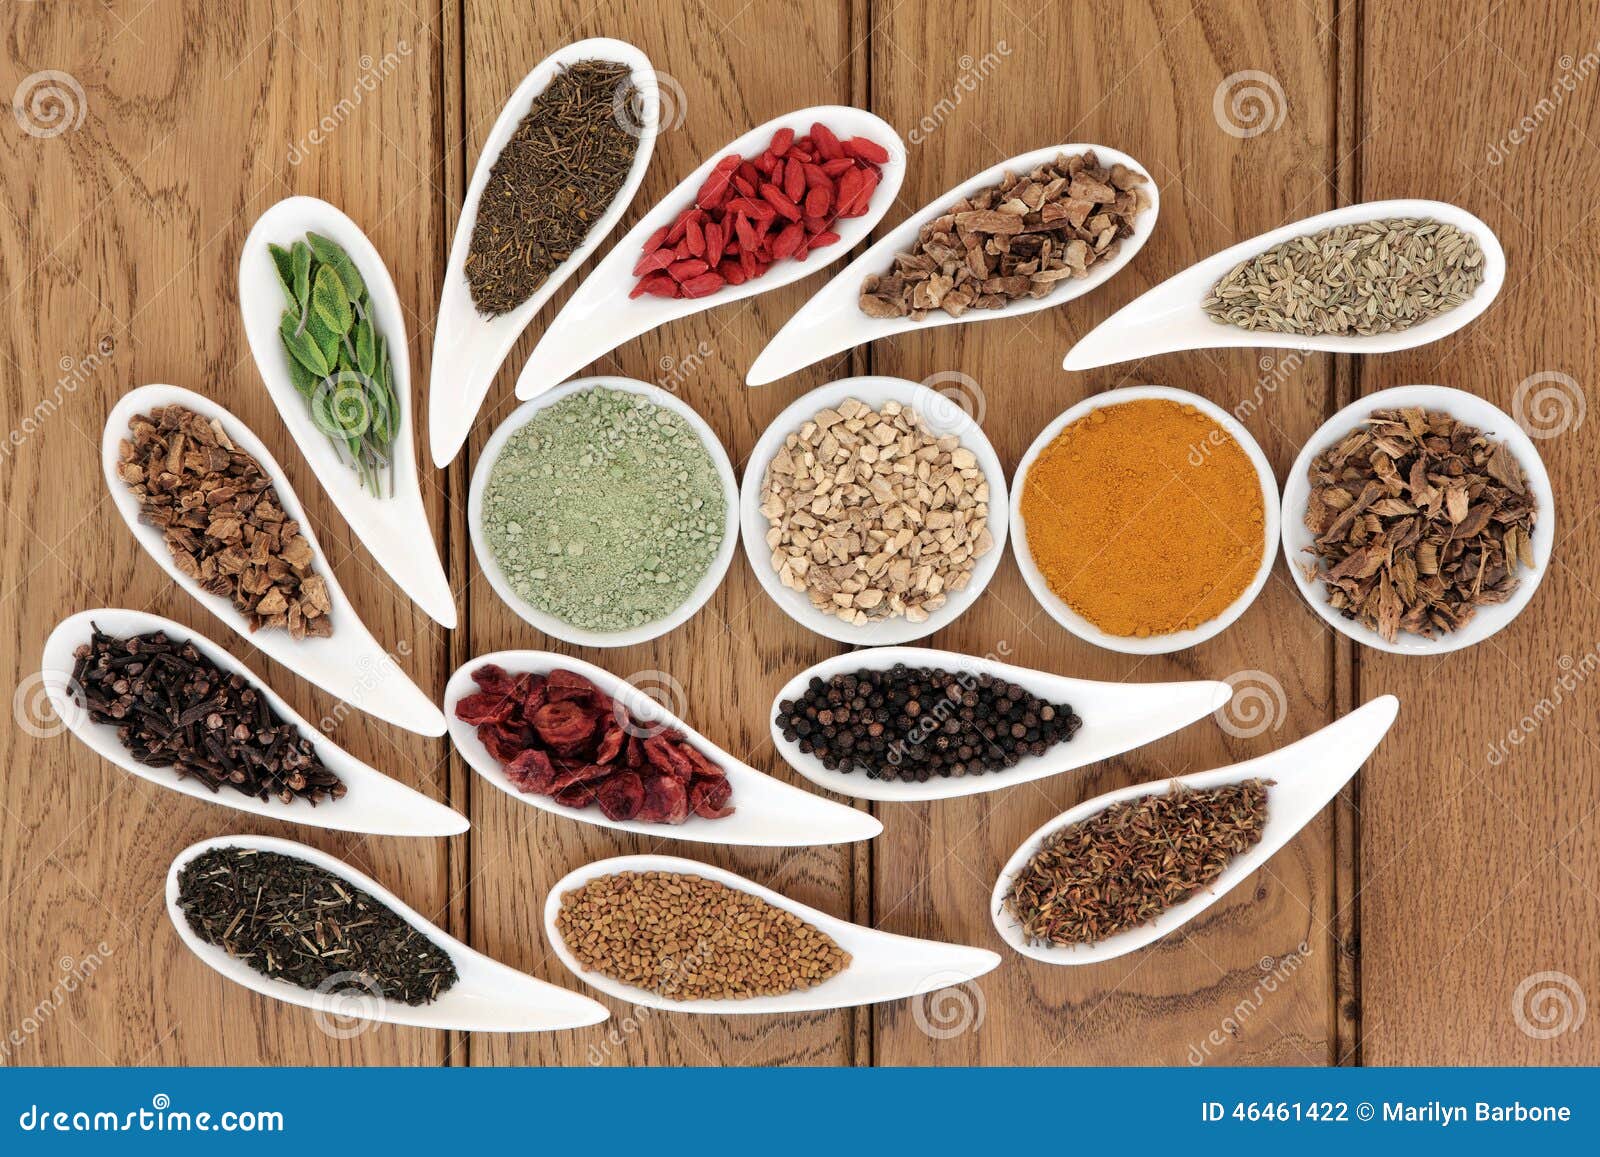 Liver Detox Superfood stock photo. Image of learge, care - 46461422